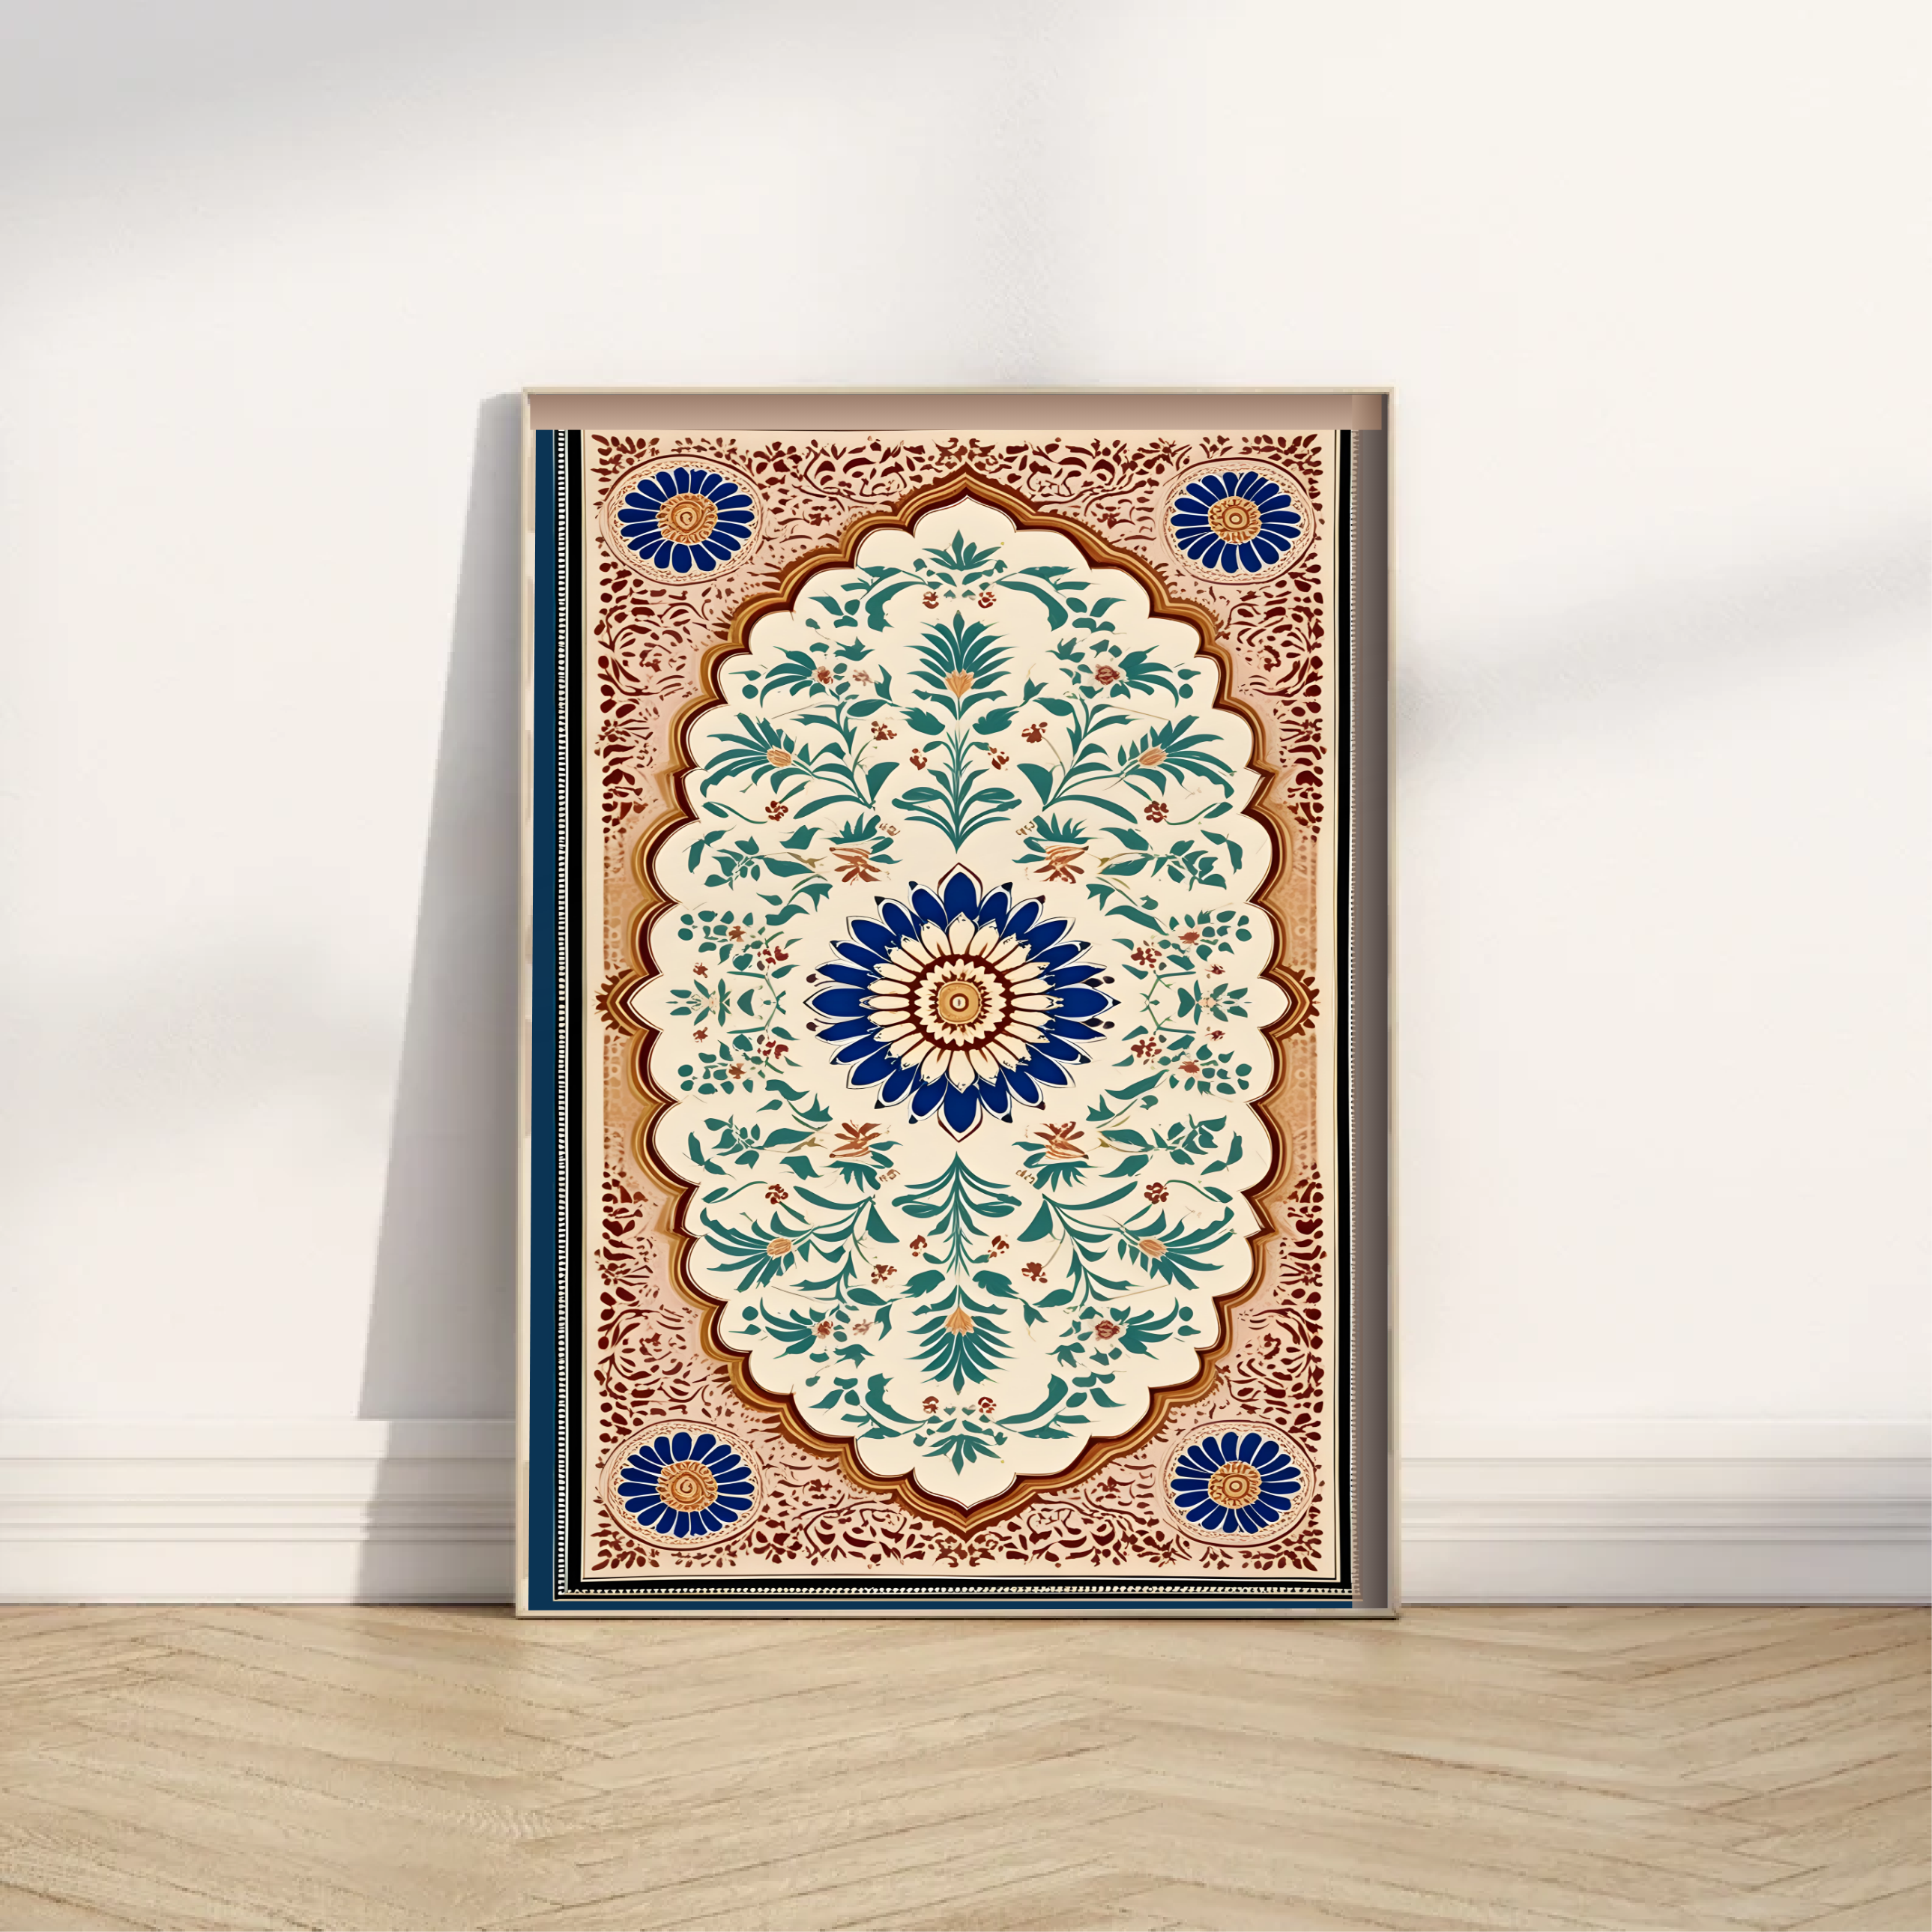 Indian Art, Indian traditional Floral Mughal Style Art, Islamic Art Print, Floral Art